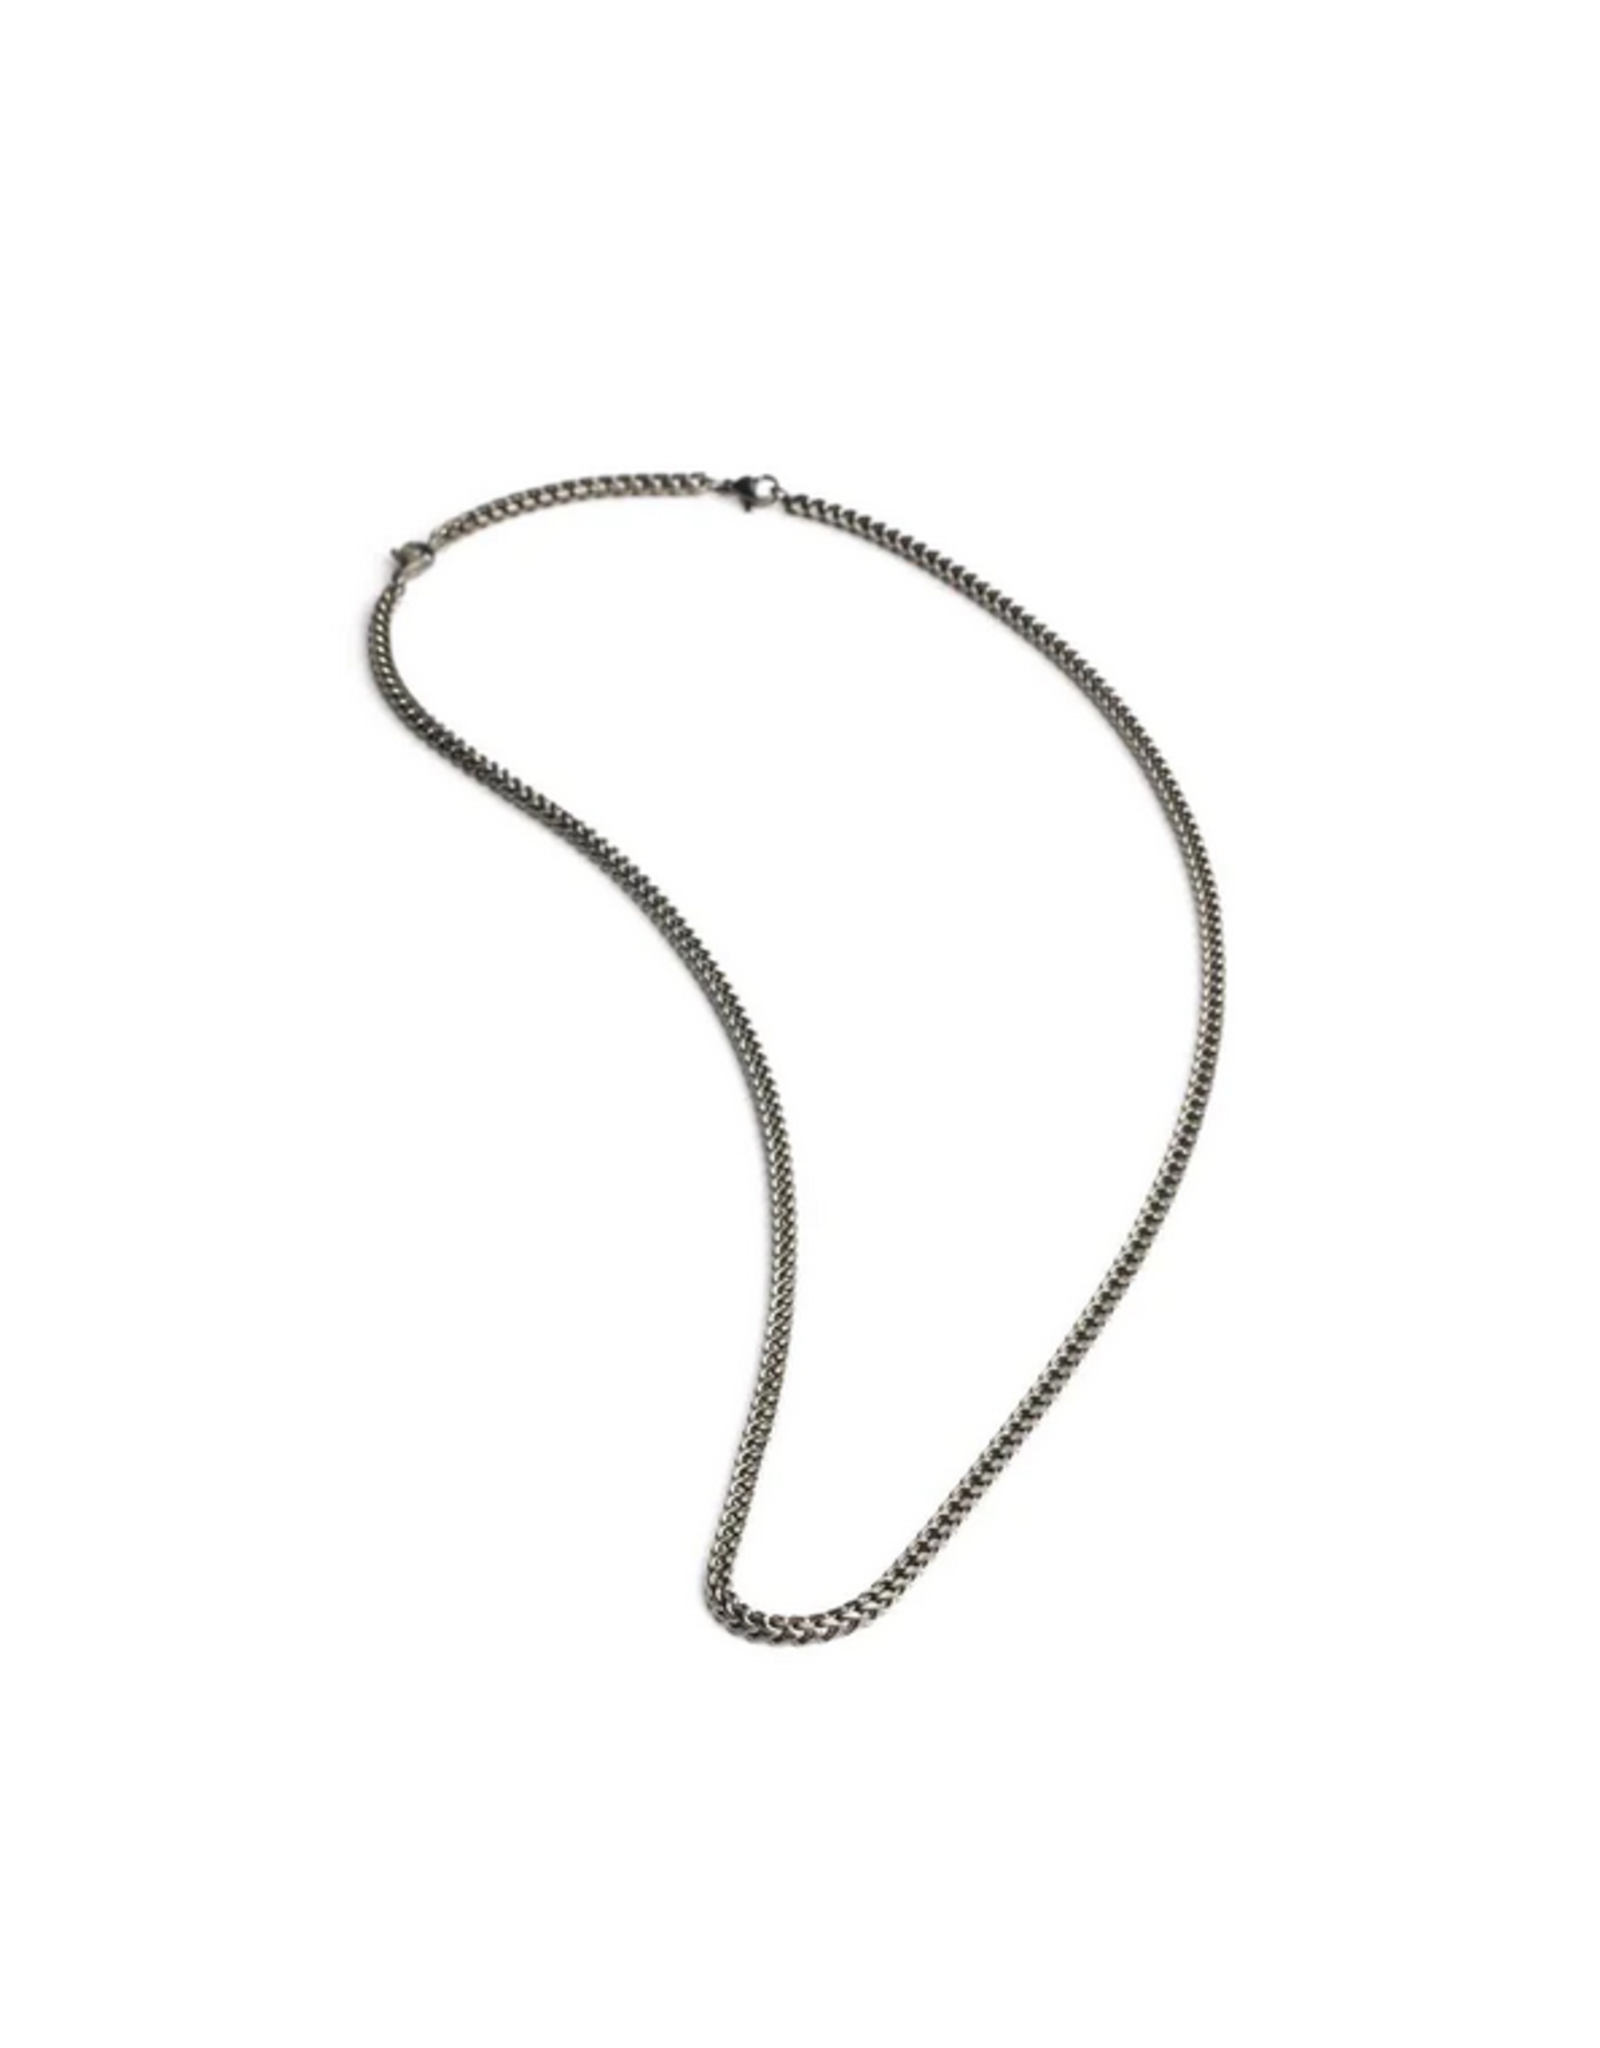 gemini-3mm-stainless-steel-foxtail-necklace-with-dark-plated-finish